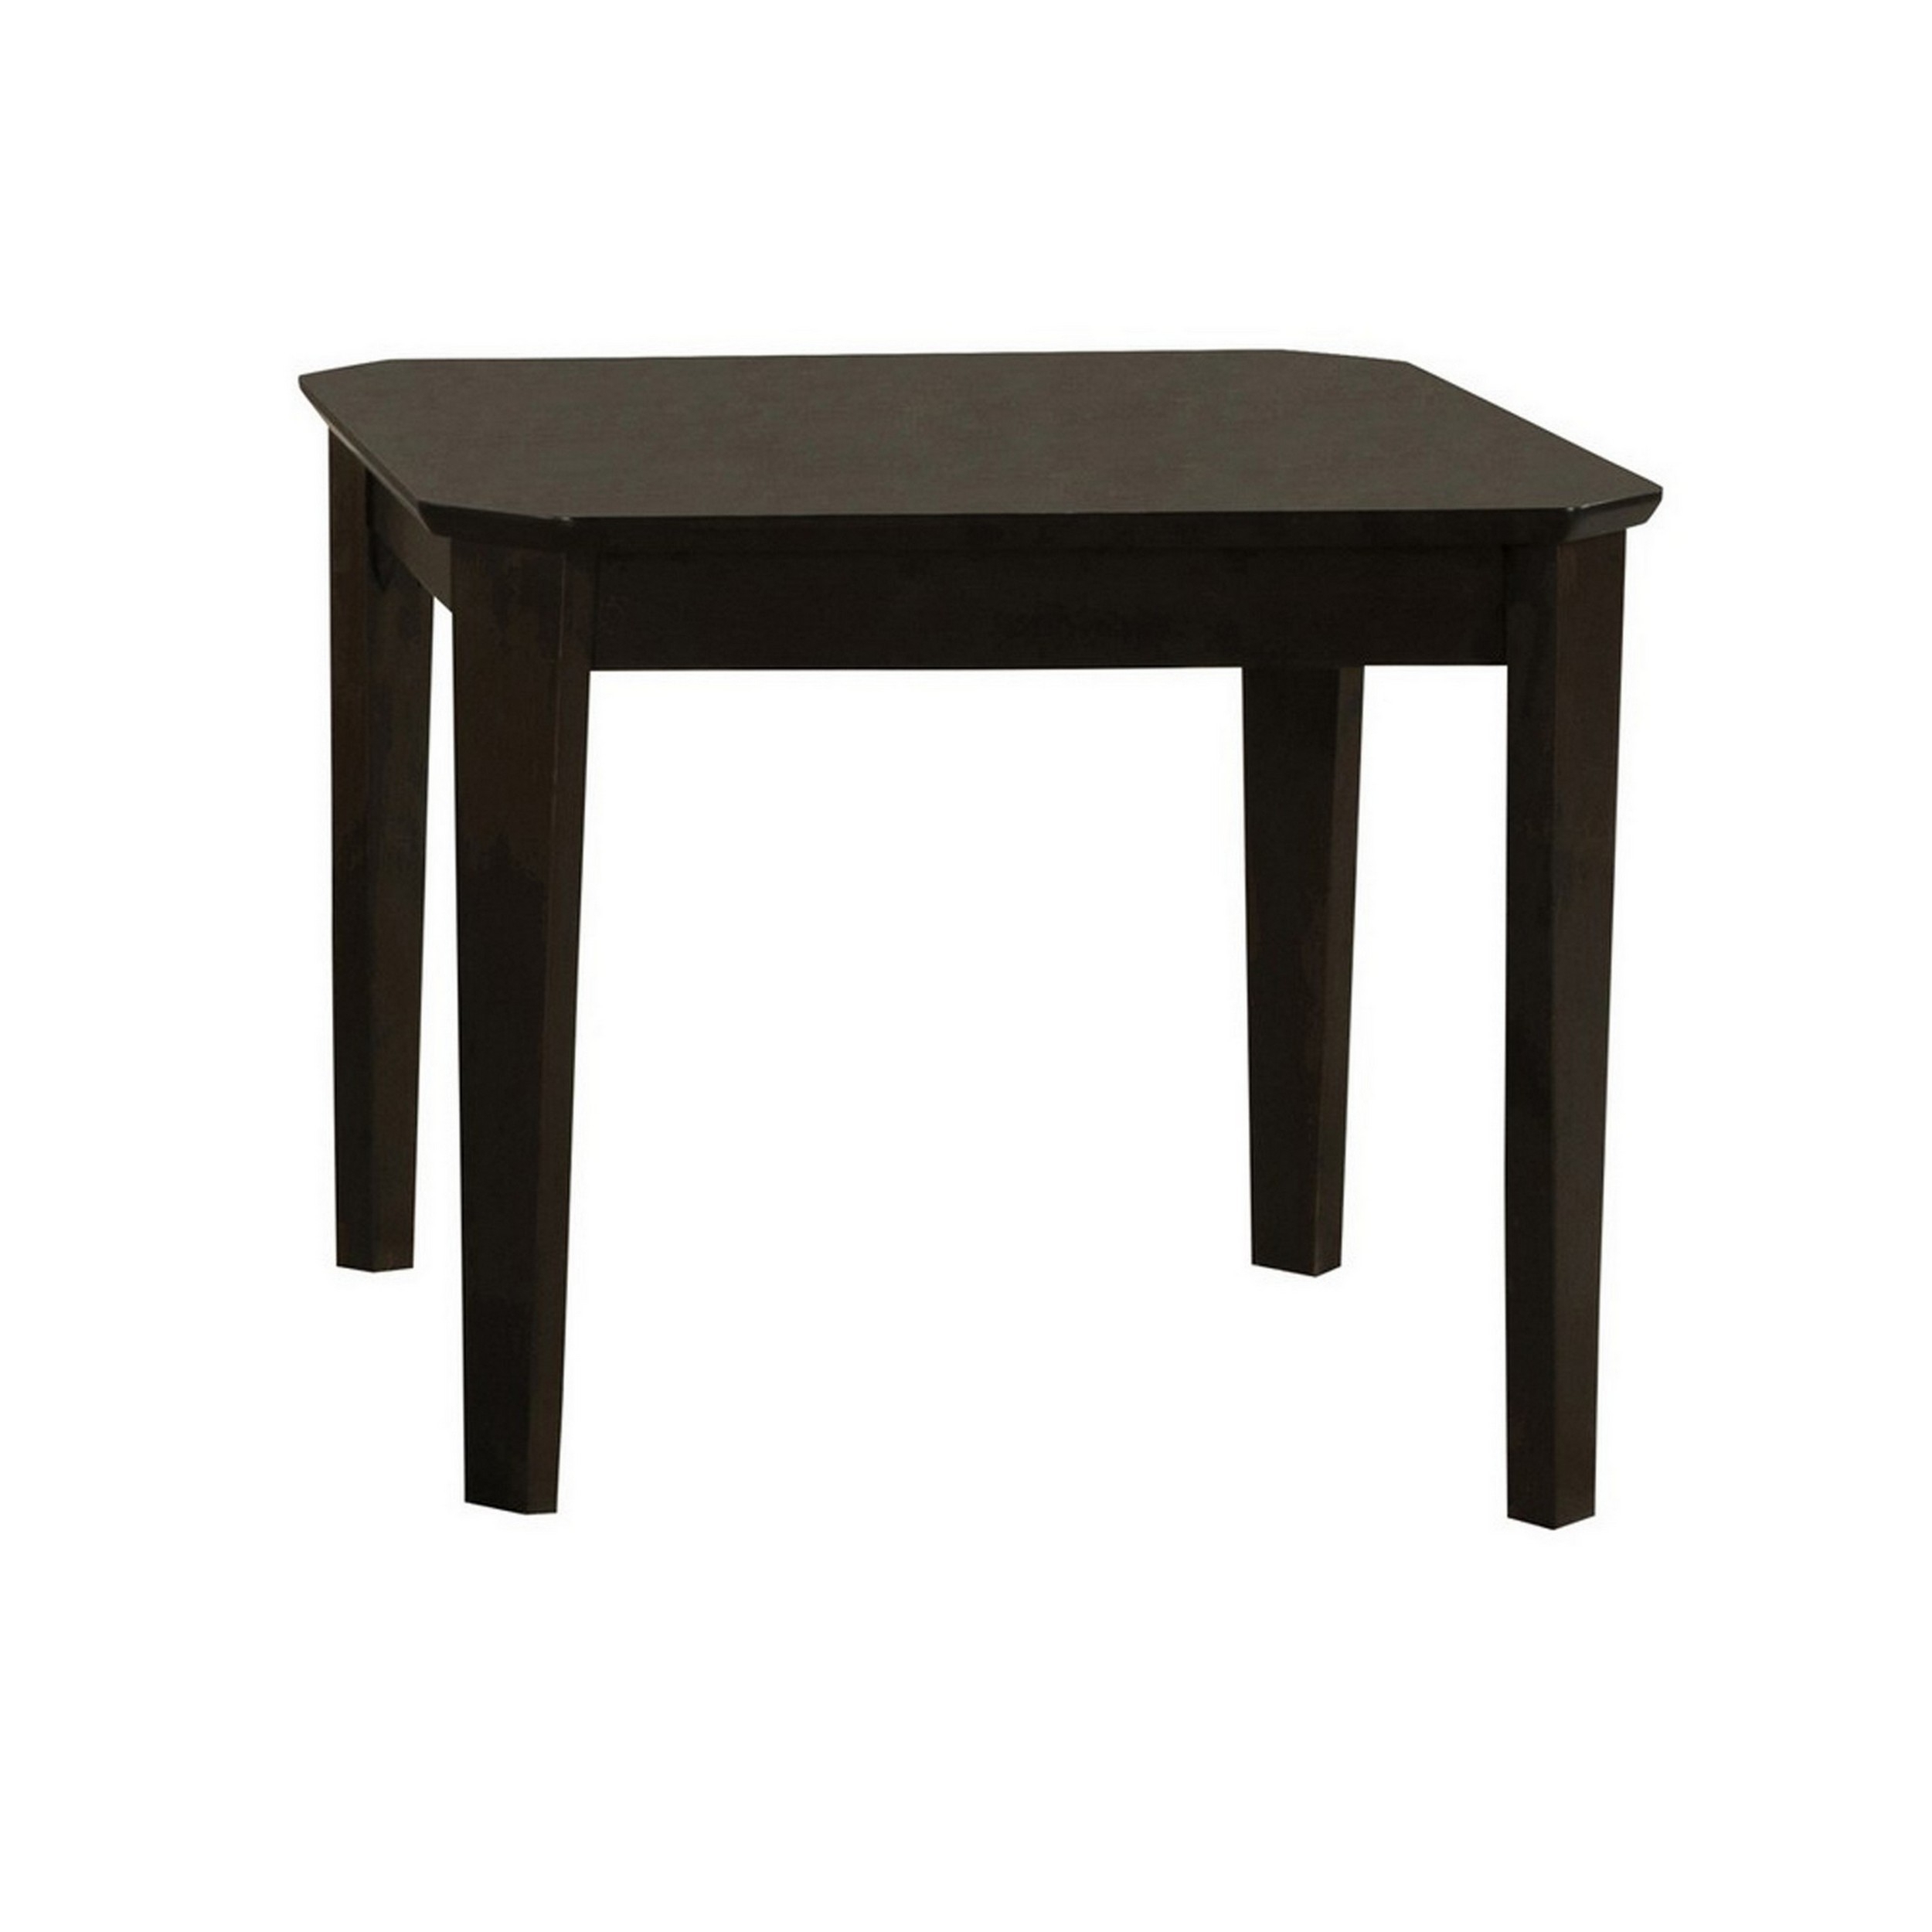 3 Piece Rectangular Coffee And Square End Table Set, Sleek Espresso Brown